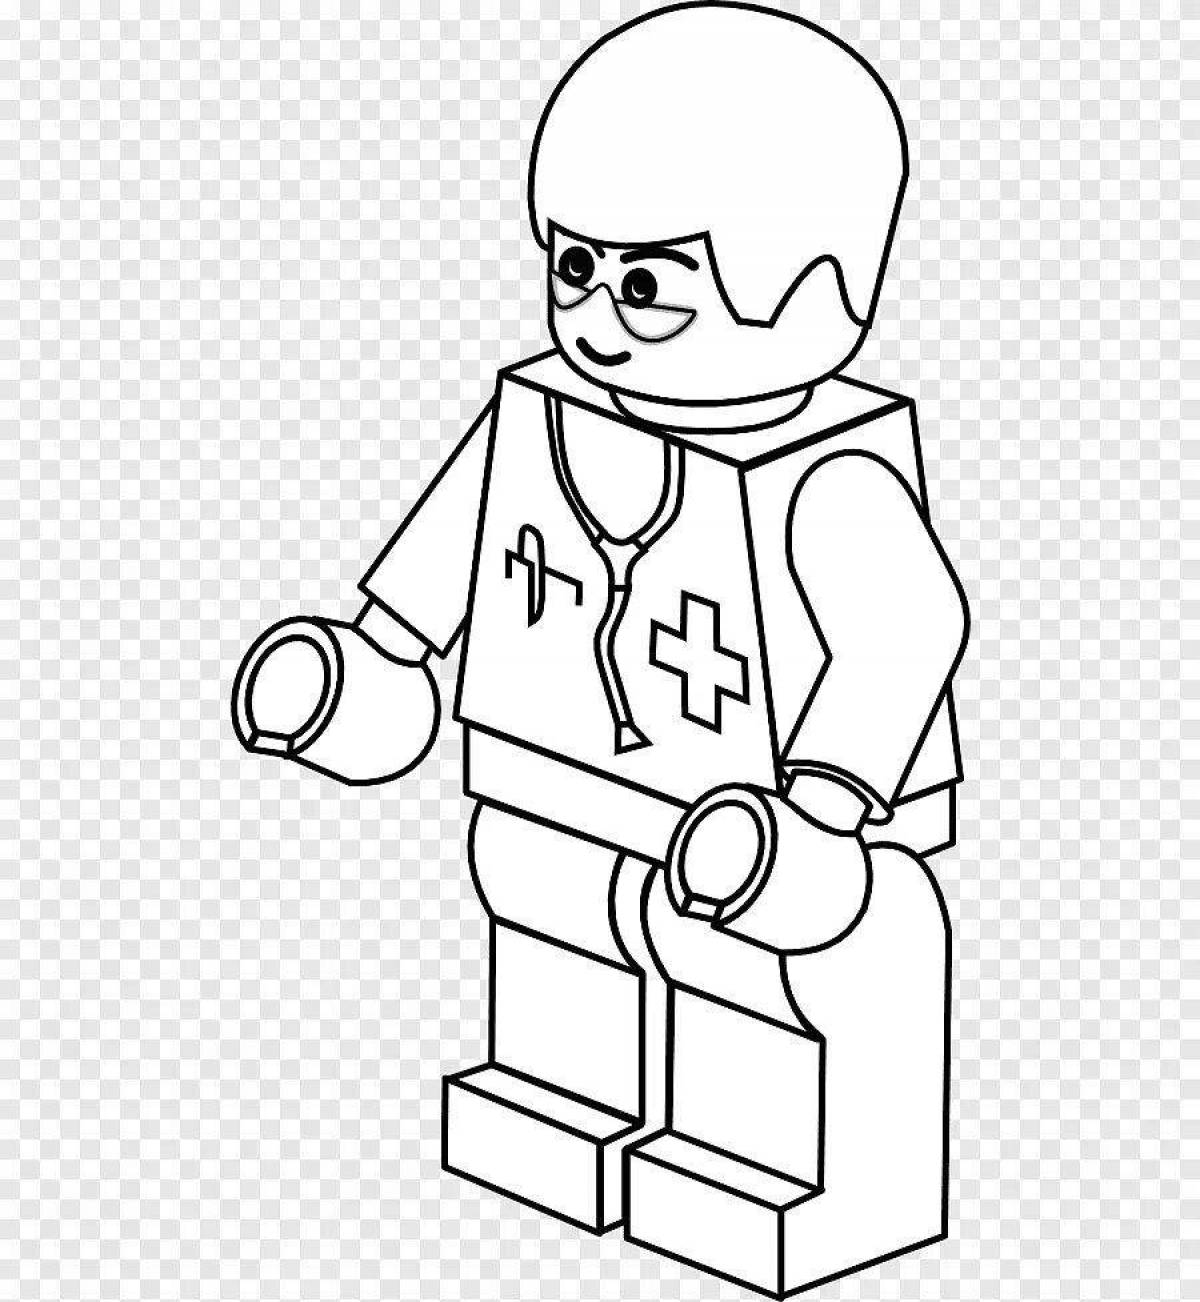 Color dynamic lego figures coloring book